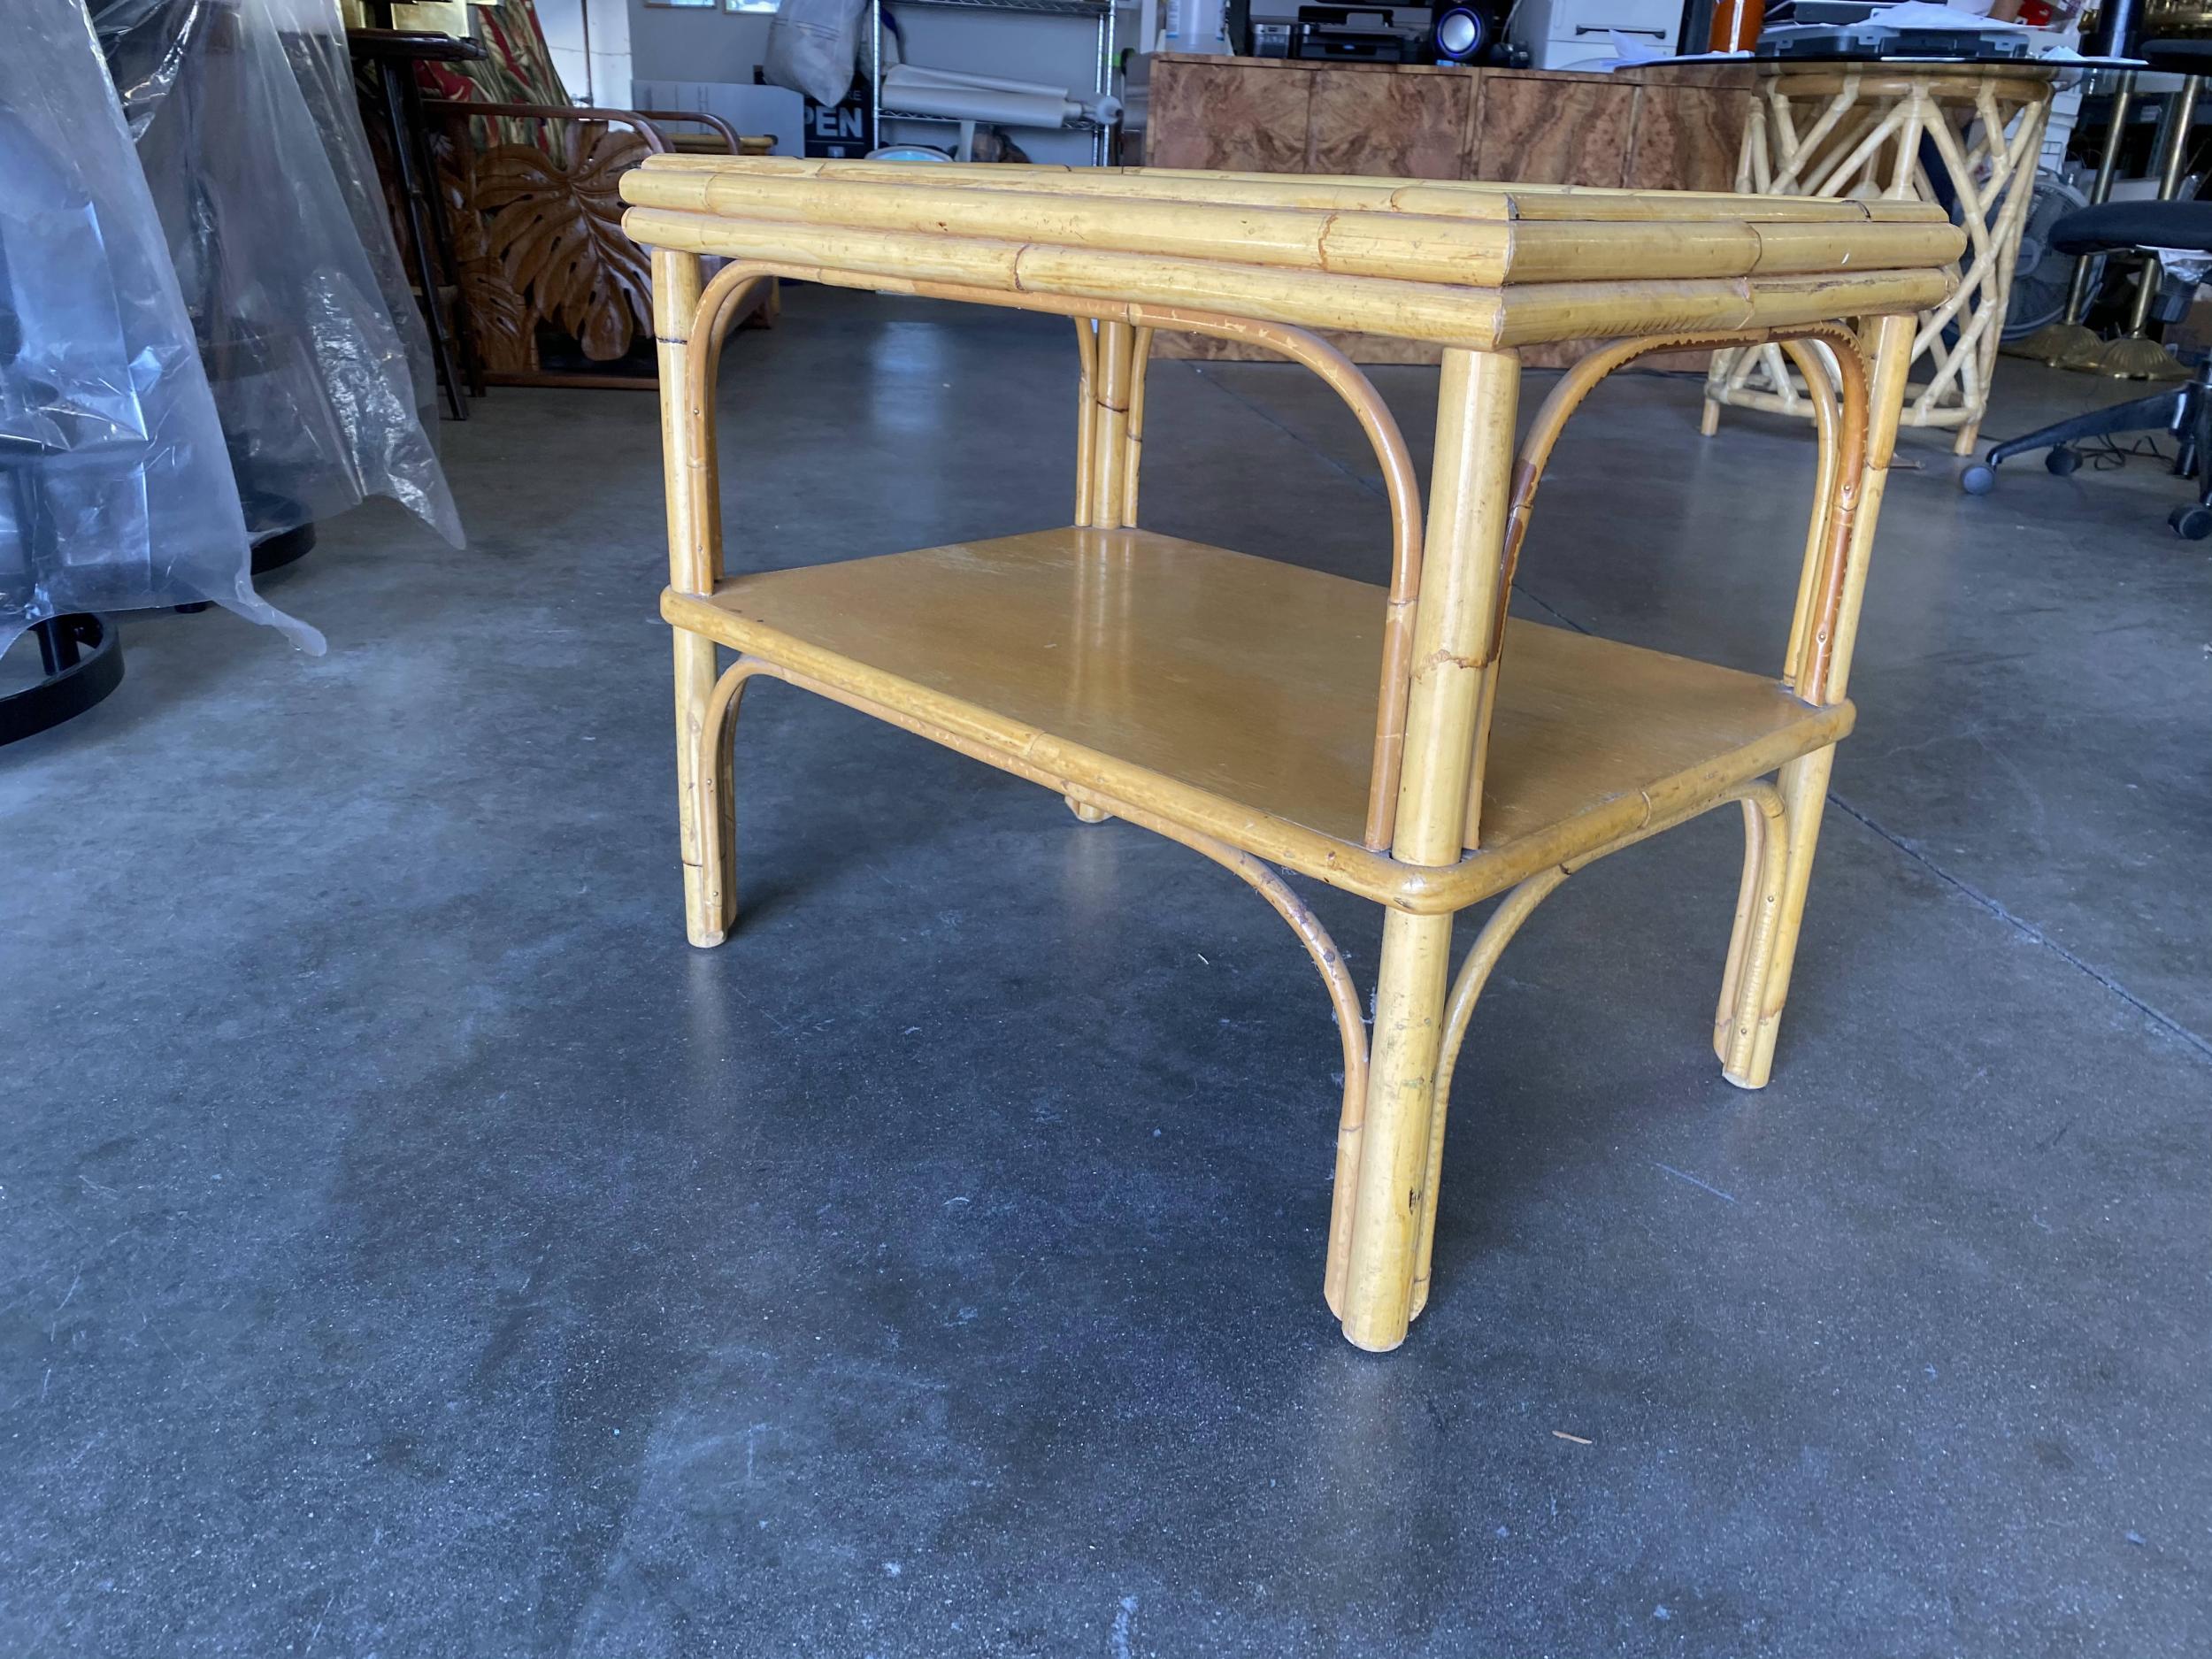 Original 1950s pole rattan rectangle coffee table with decorative stick rattan arches topped with a ripped frosted glass top. The table feature a Two-Tier design with a Mahogany bottom shelf for storage of magazines, e-readers, Remotes or anything